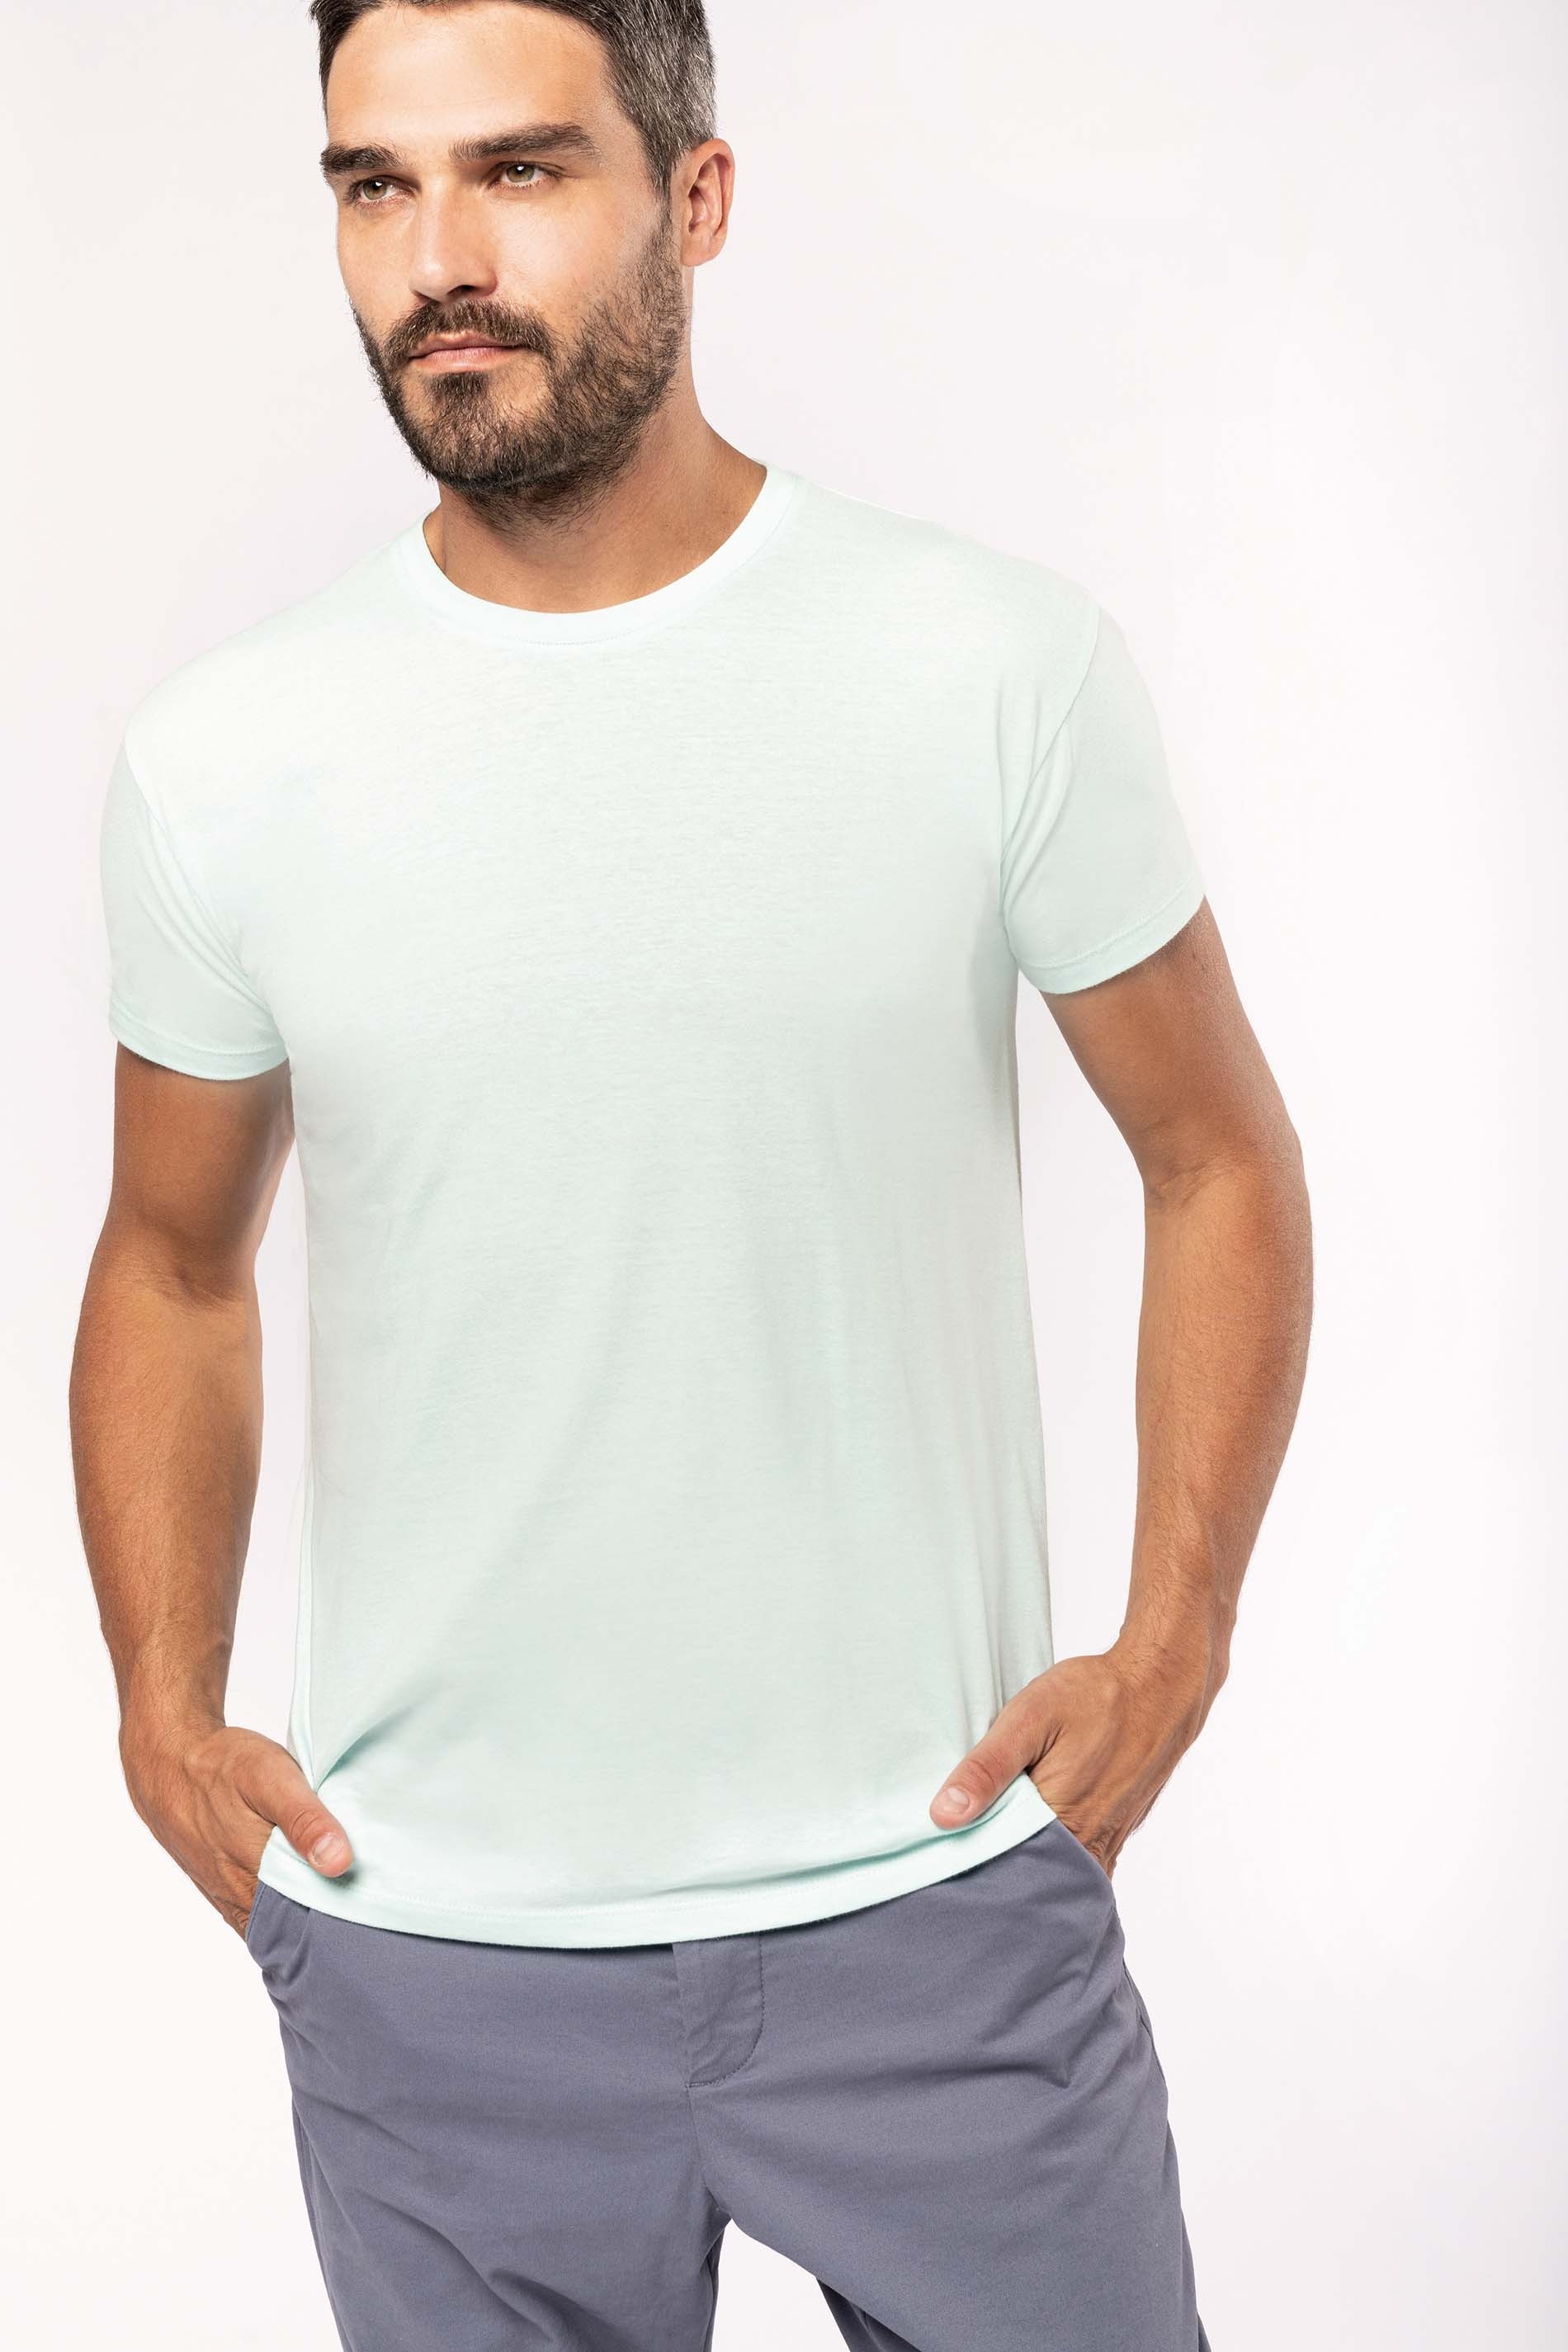 T-shirt Bio150 col rond homme